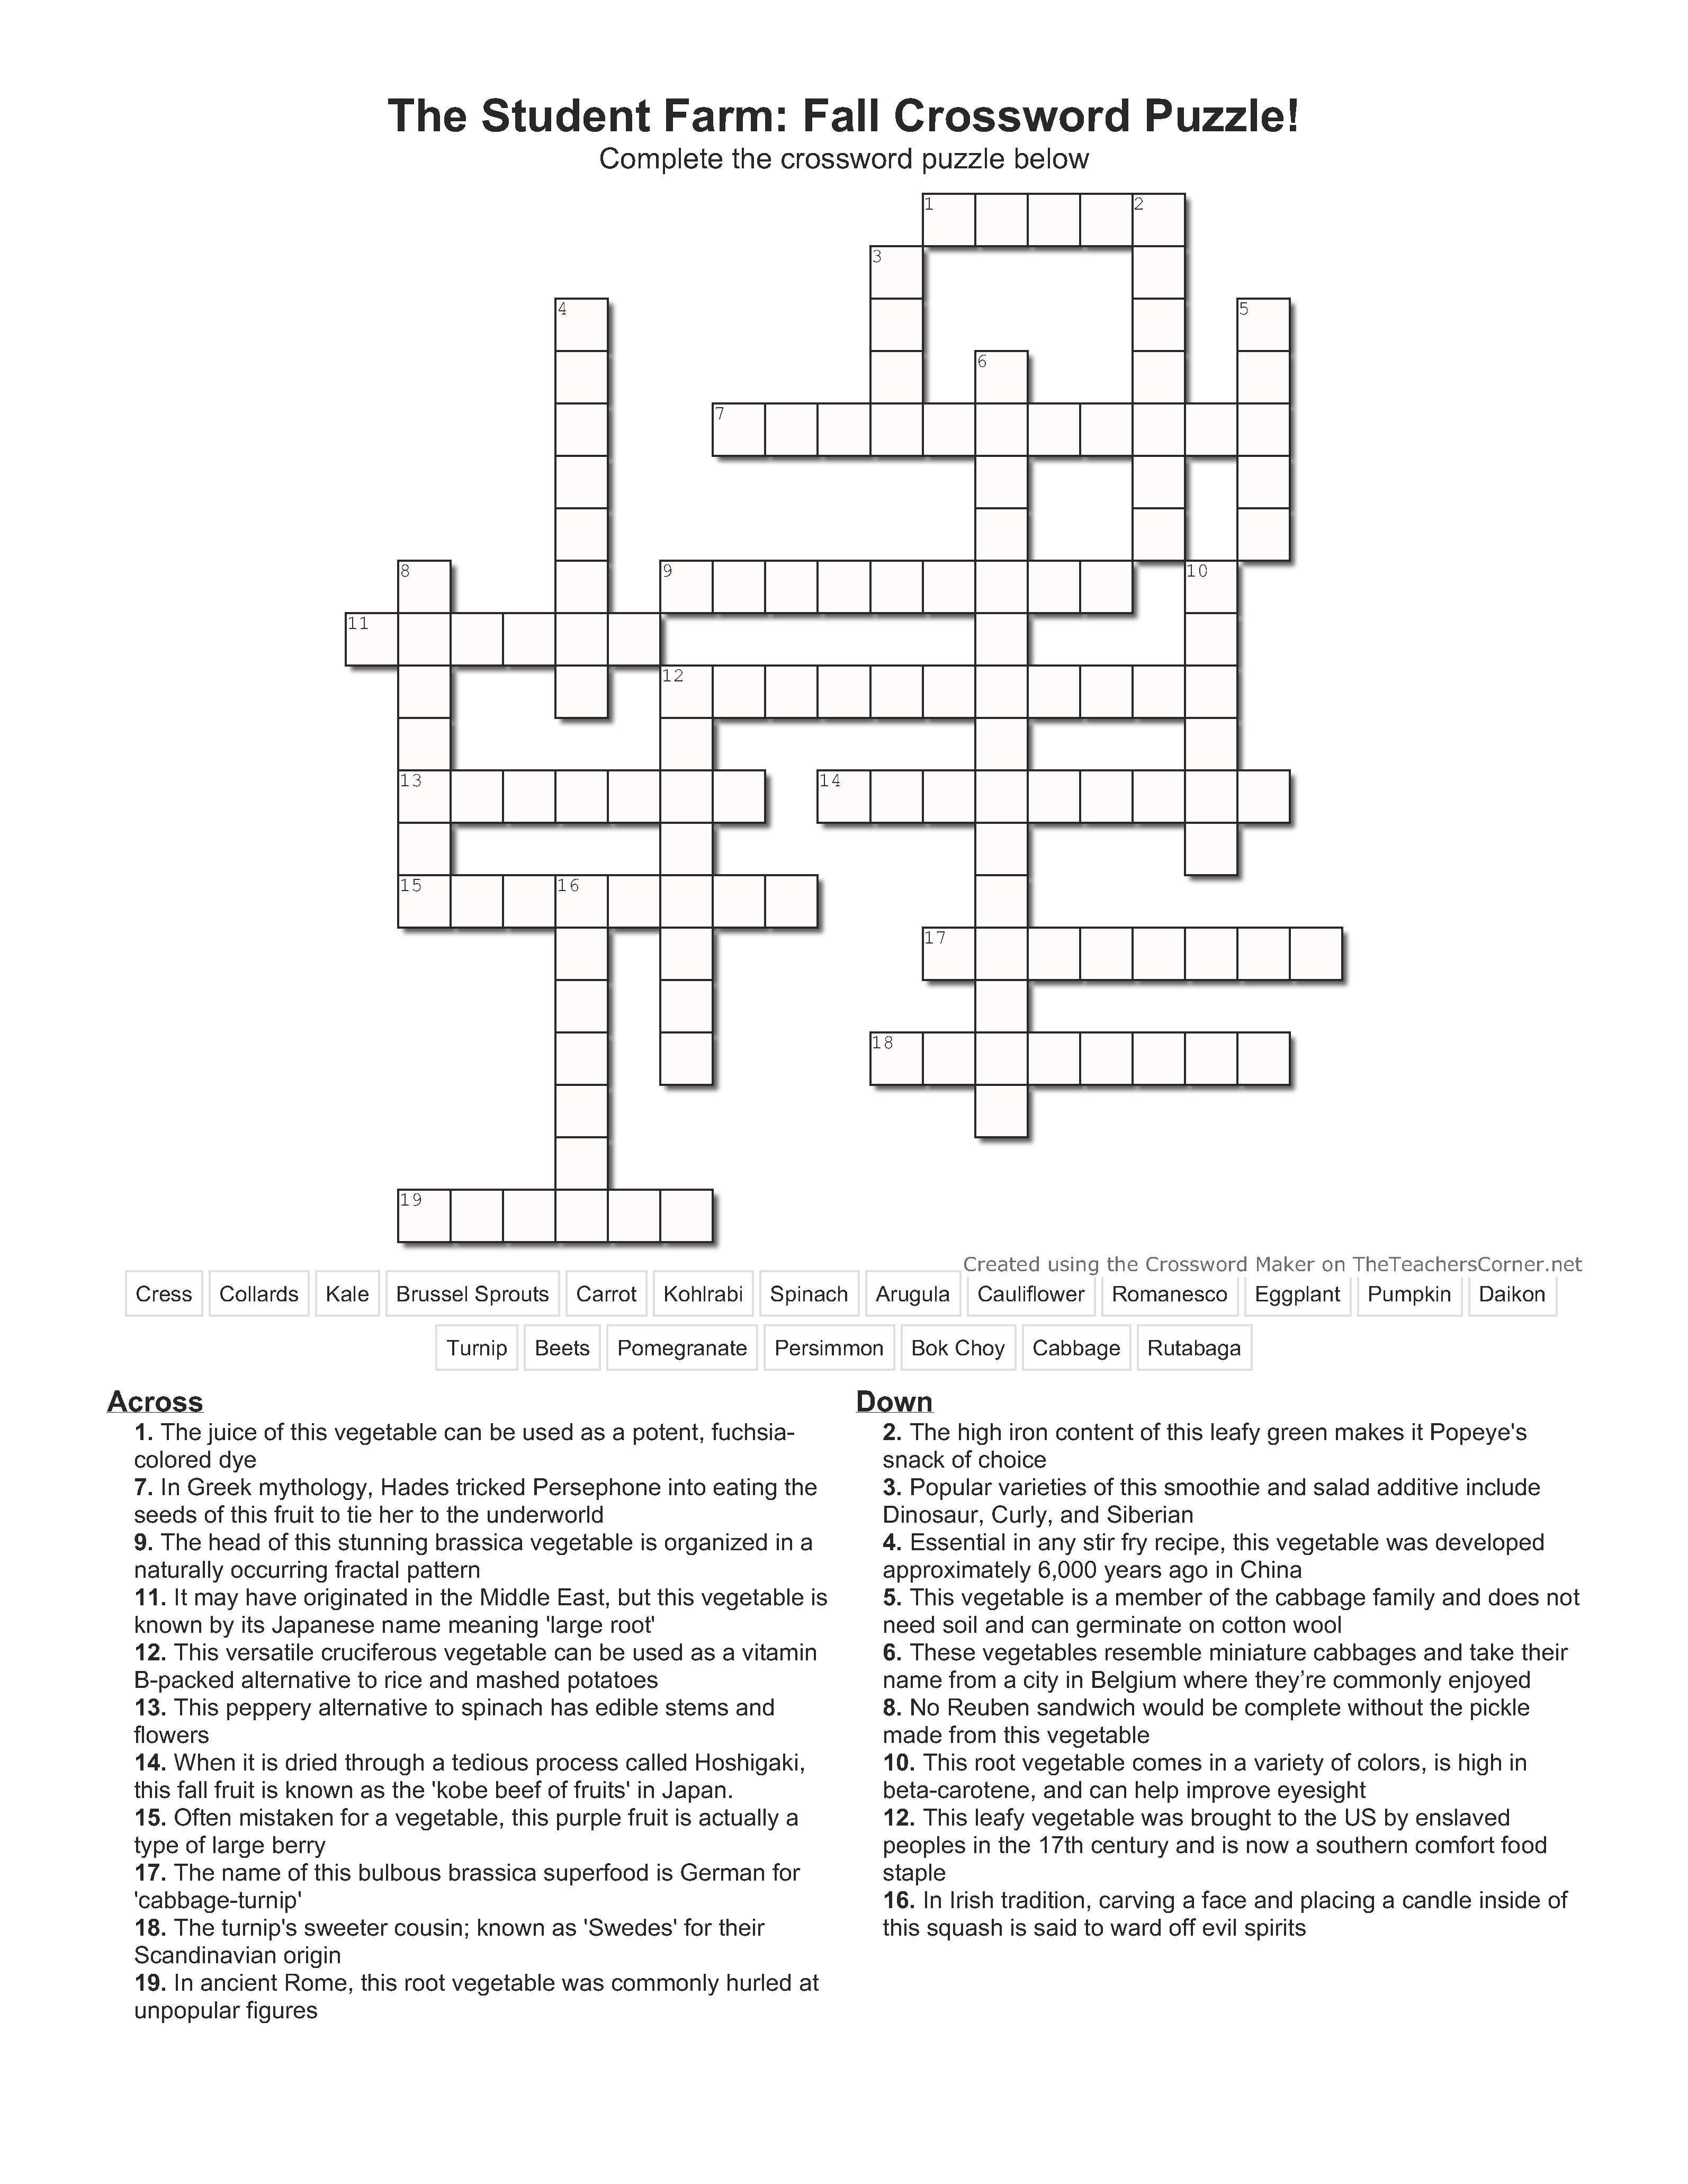 Fall crossword for the student farm